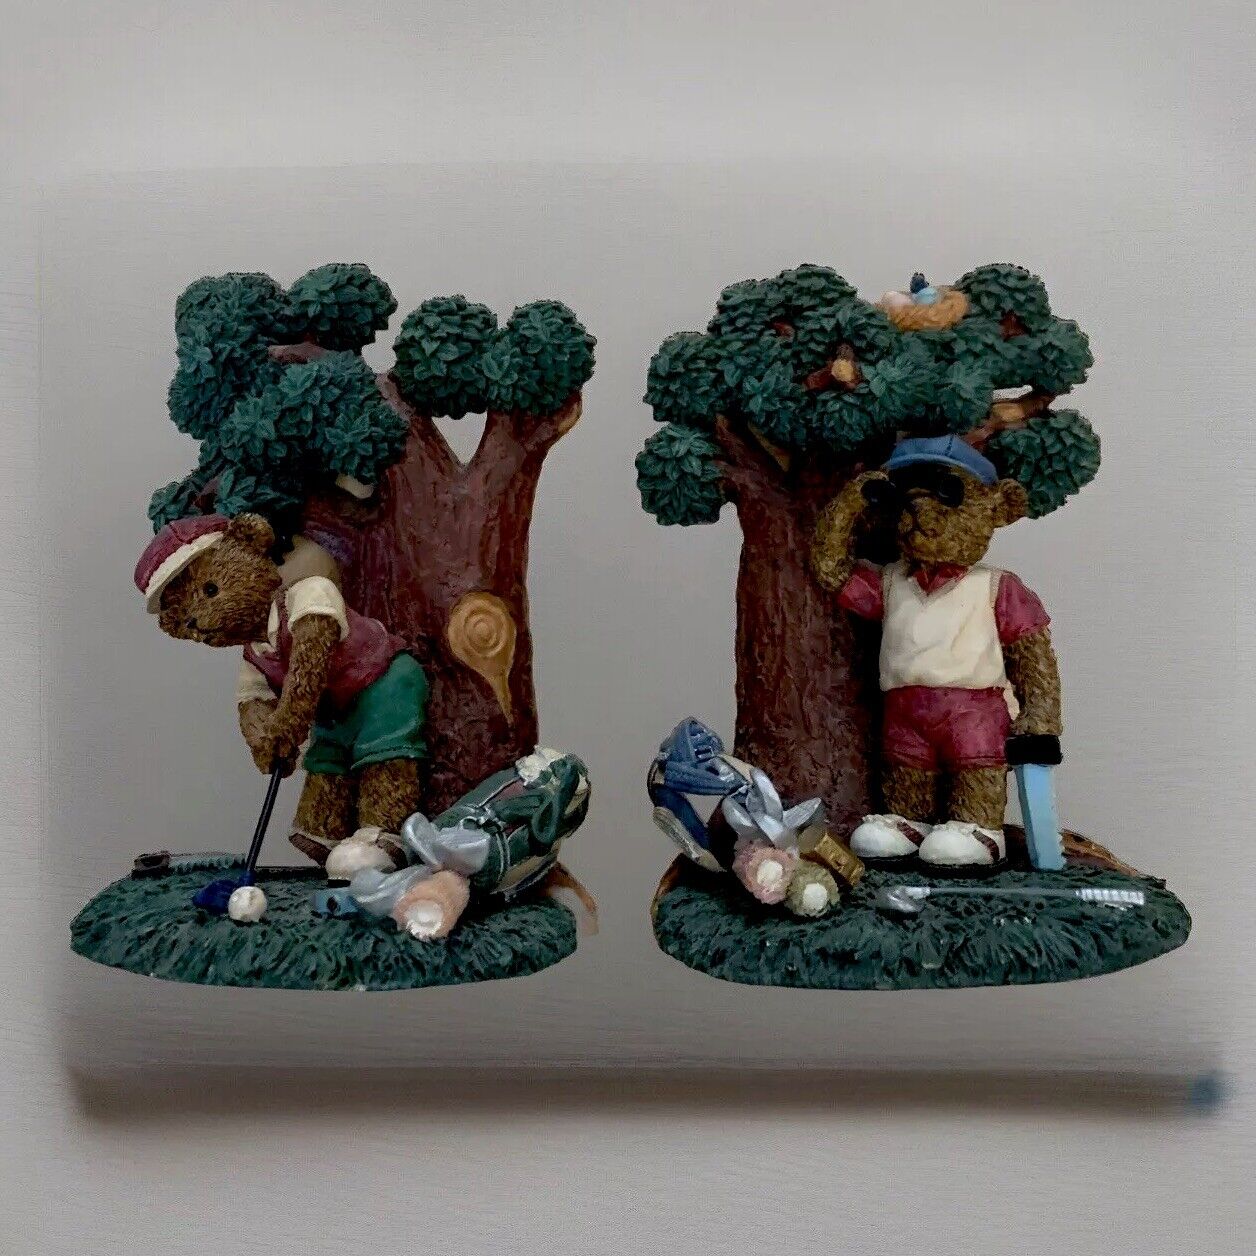 Herco figurines teddy bear golf theme  book ends. Great Gift For Golfing Fans.